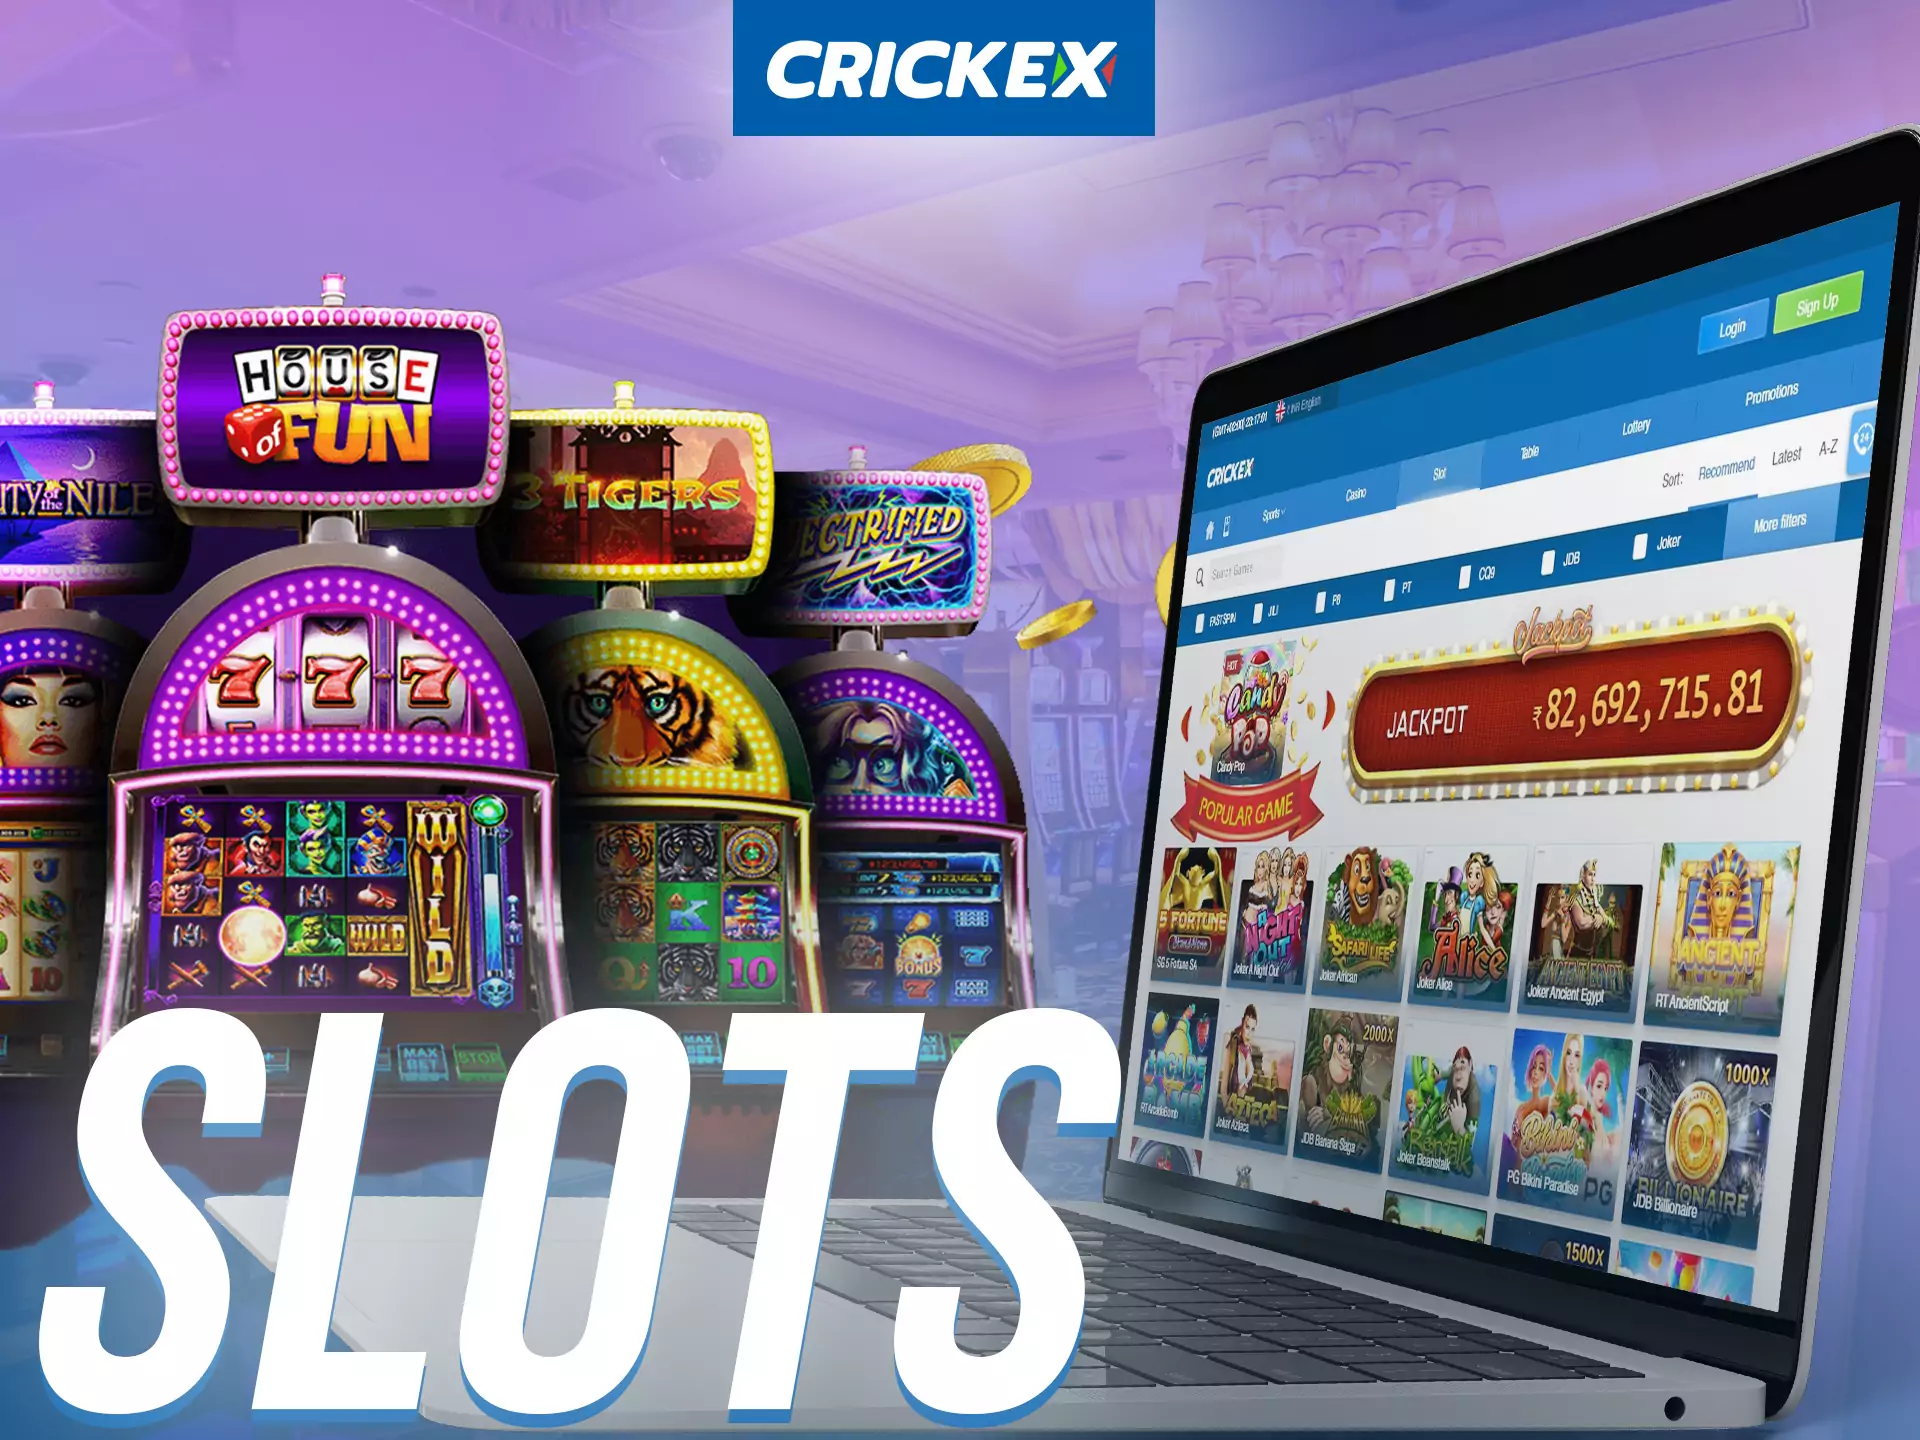 At Crickex, try your luck at slots.